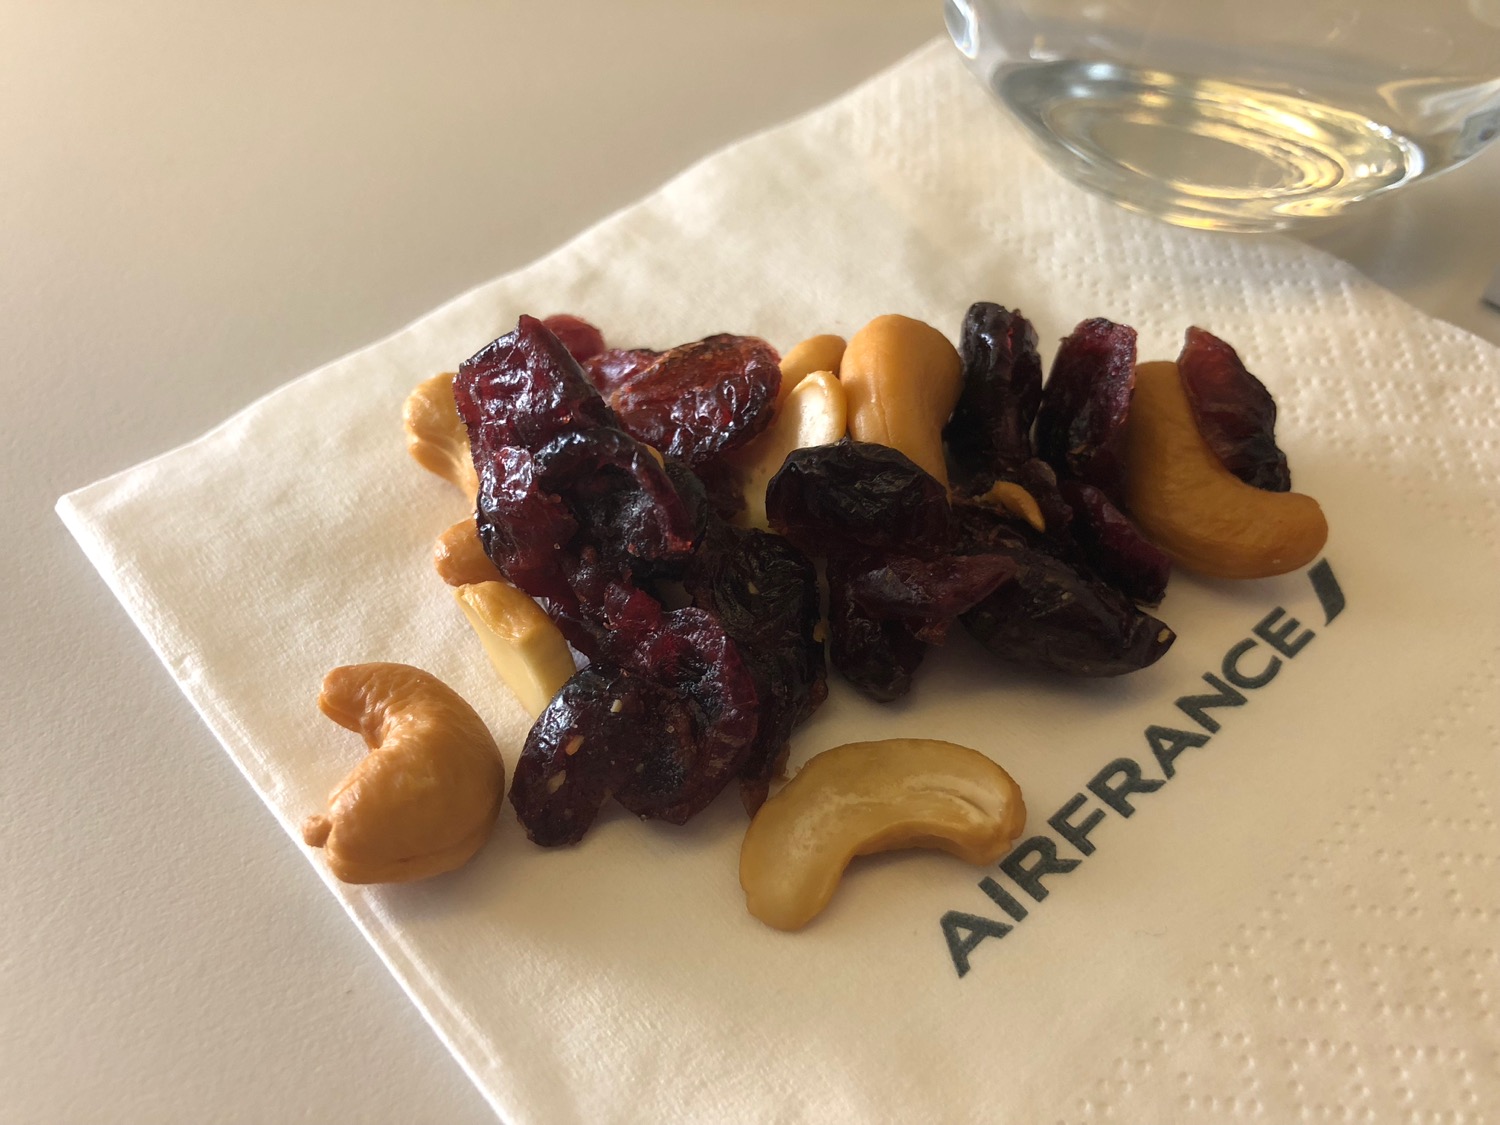 a pile of nuts and dried fruits on a napkin